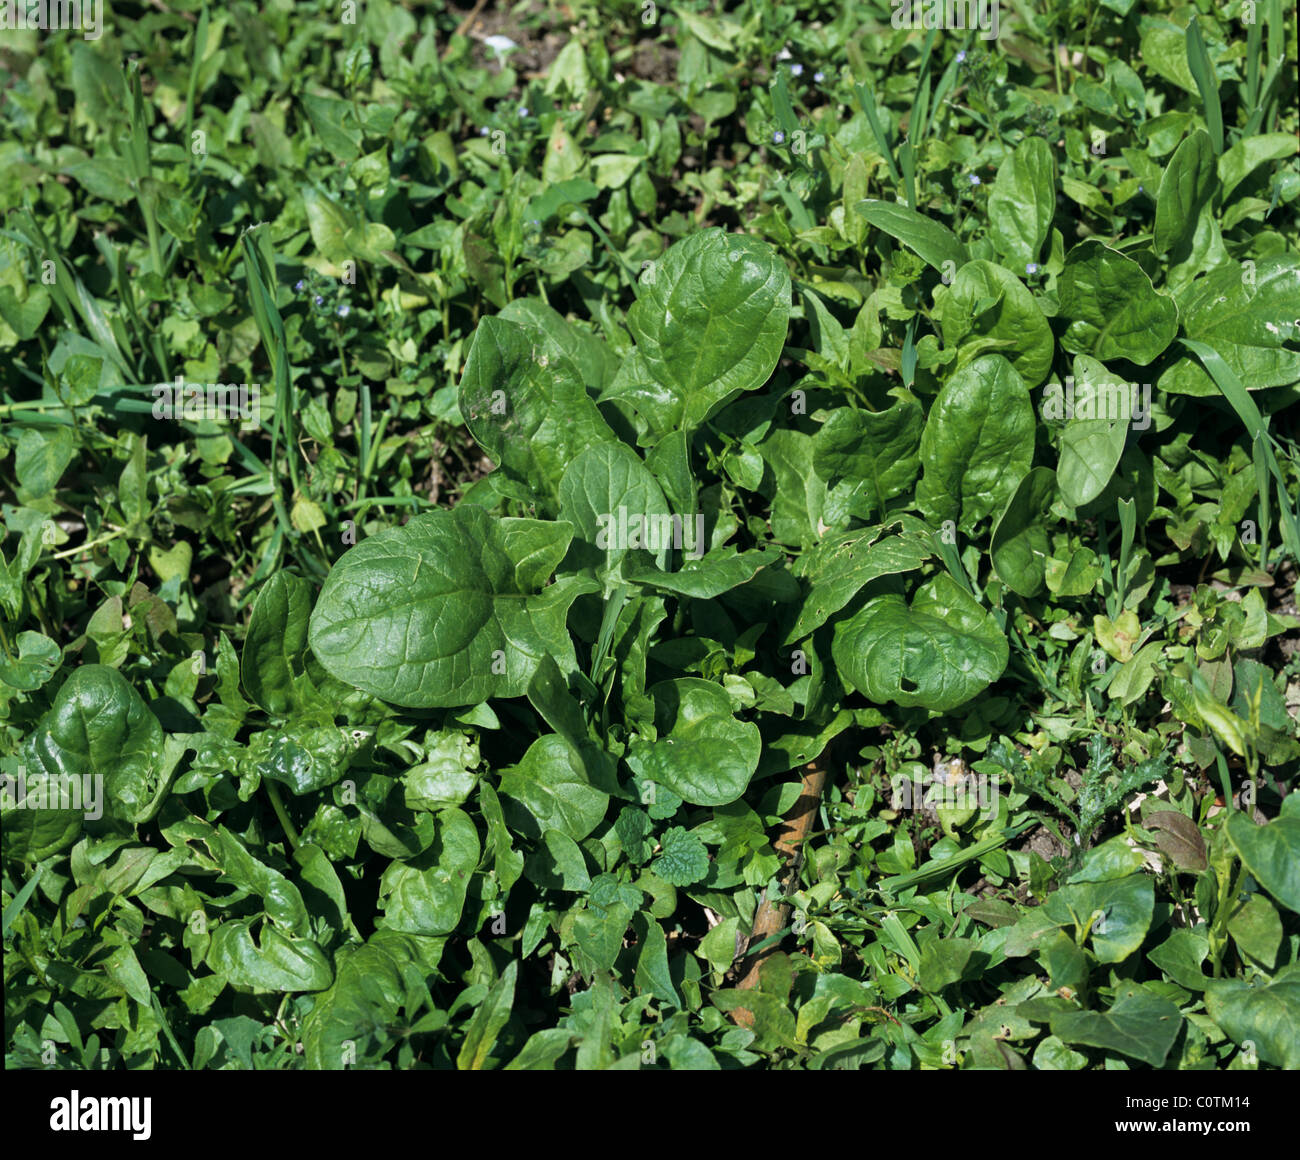 Severe arable weed infestation in a garden vegetable patch with young spinach Stock Photo